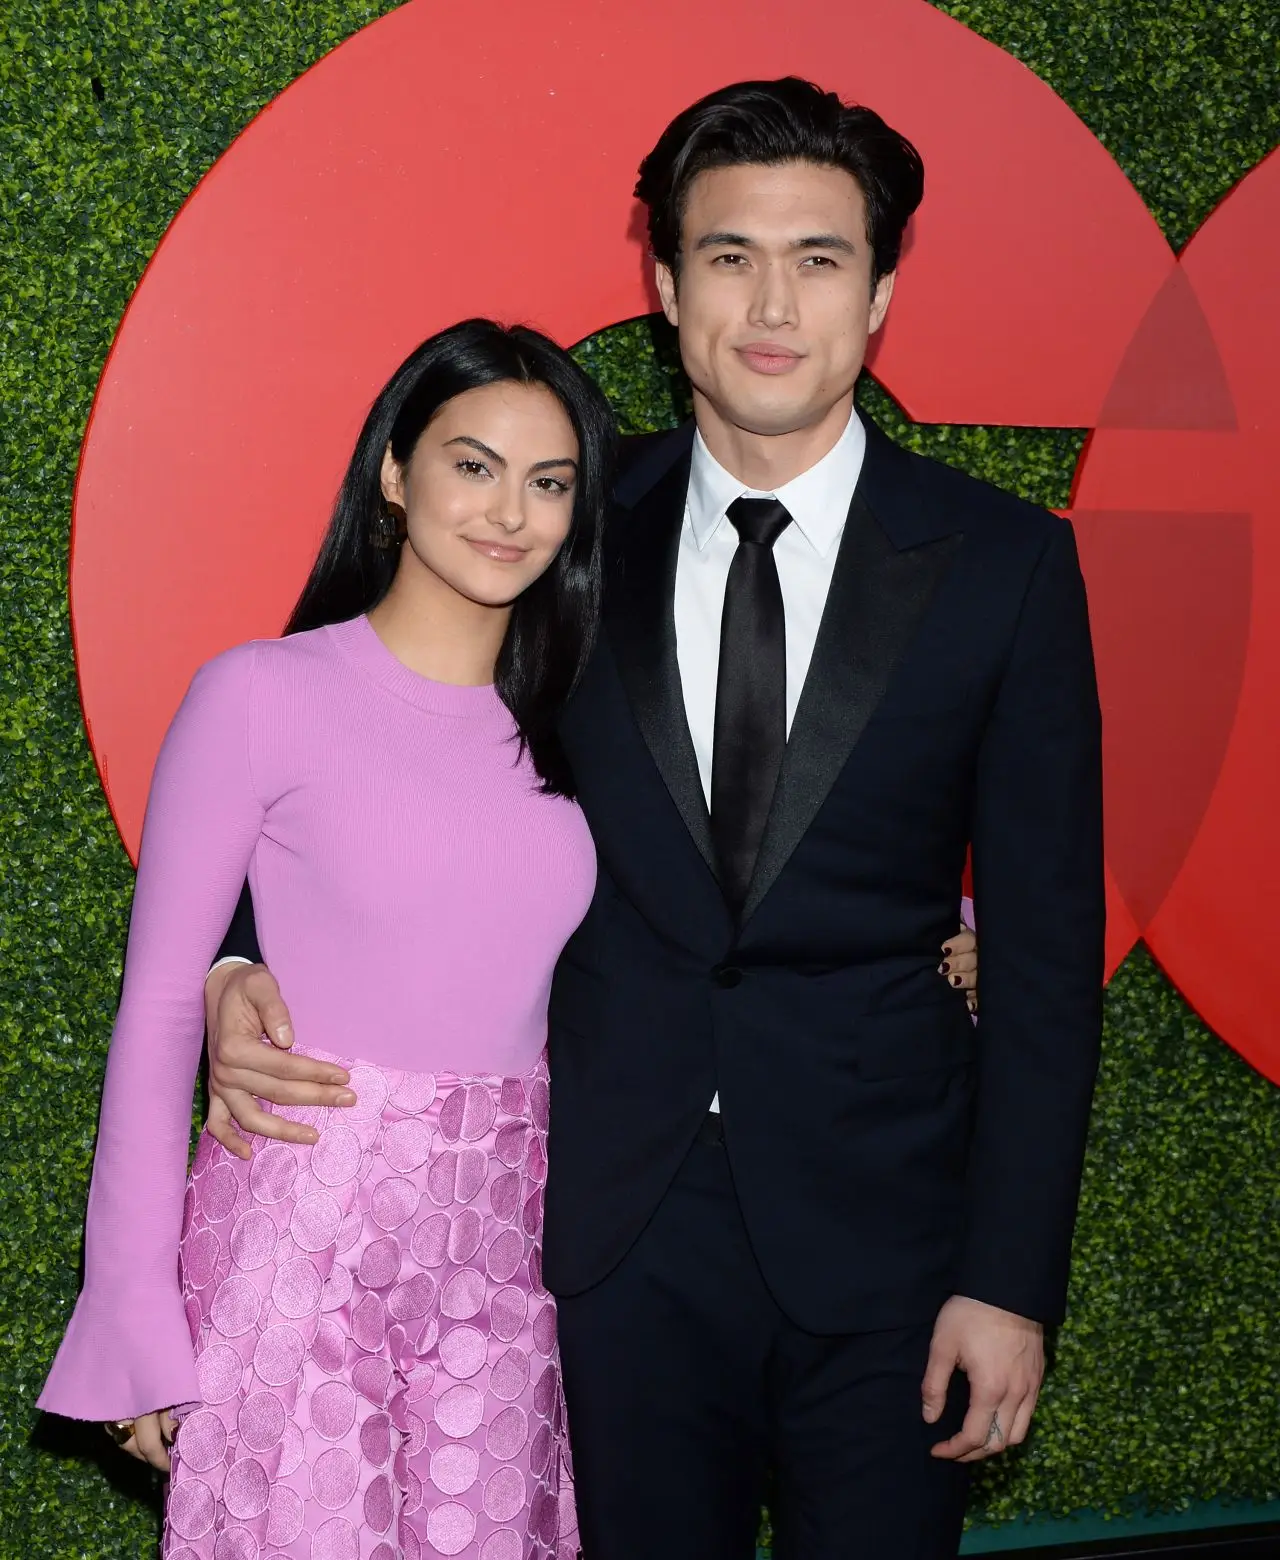 CAMILA MENDES AT 2018 GQ MEN OF THE YEAR PARTY IN LOS ANGELES3